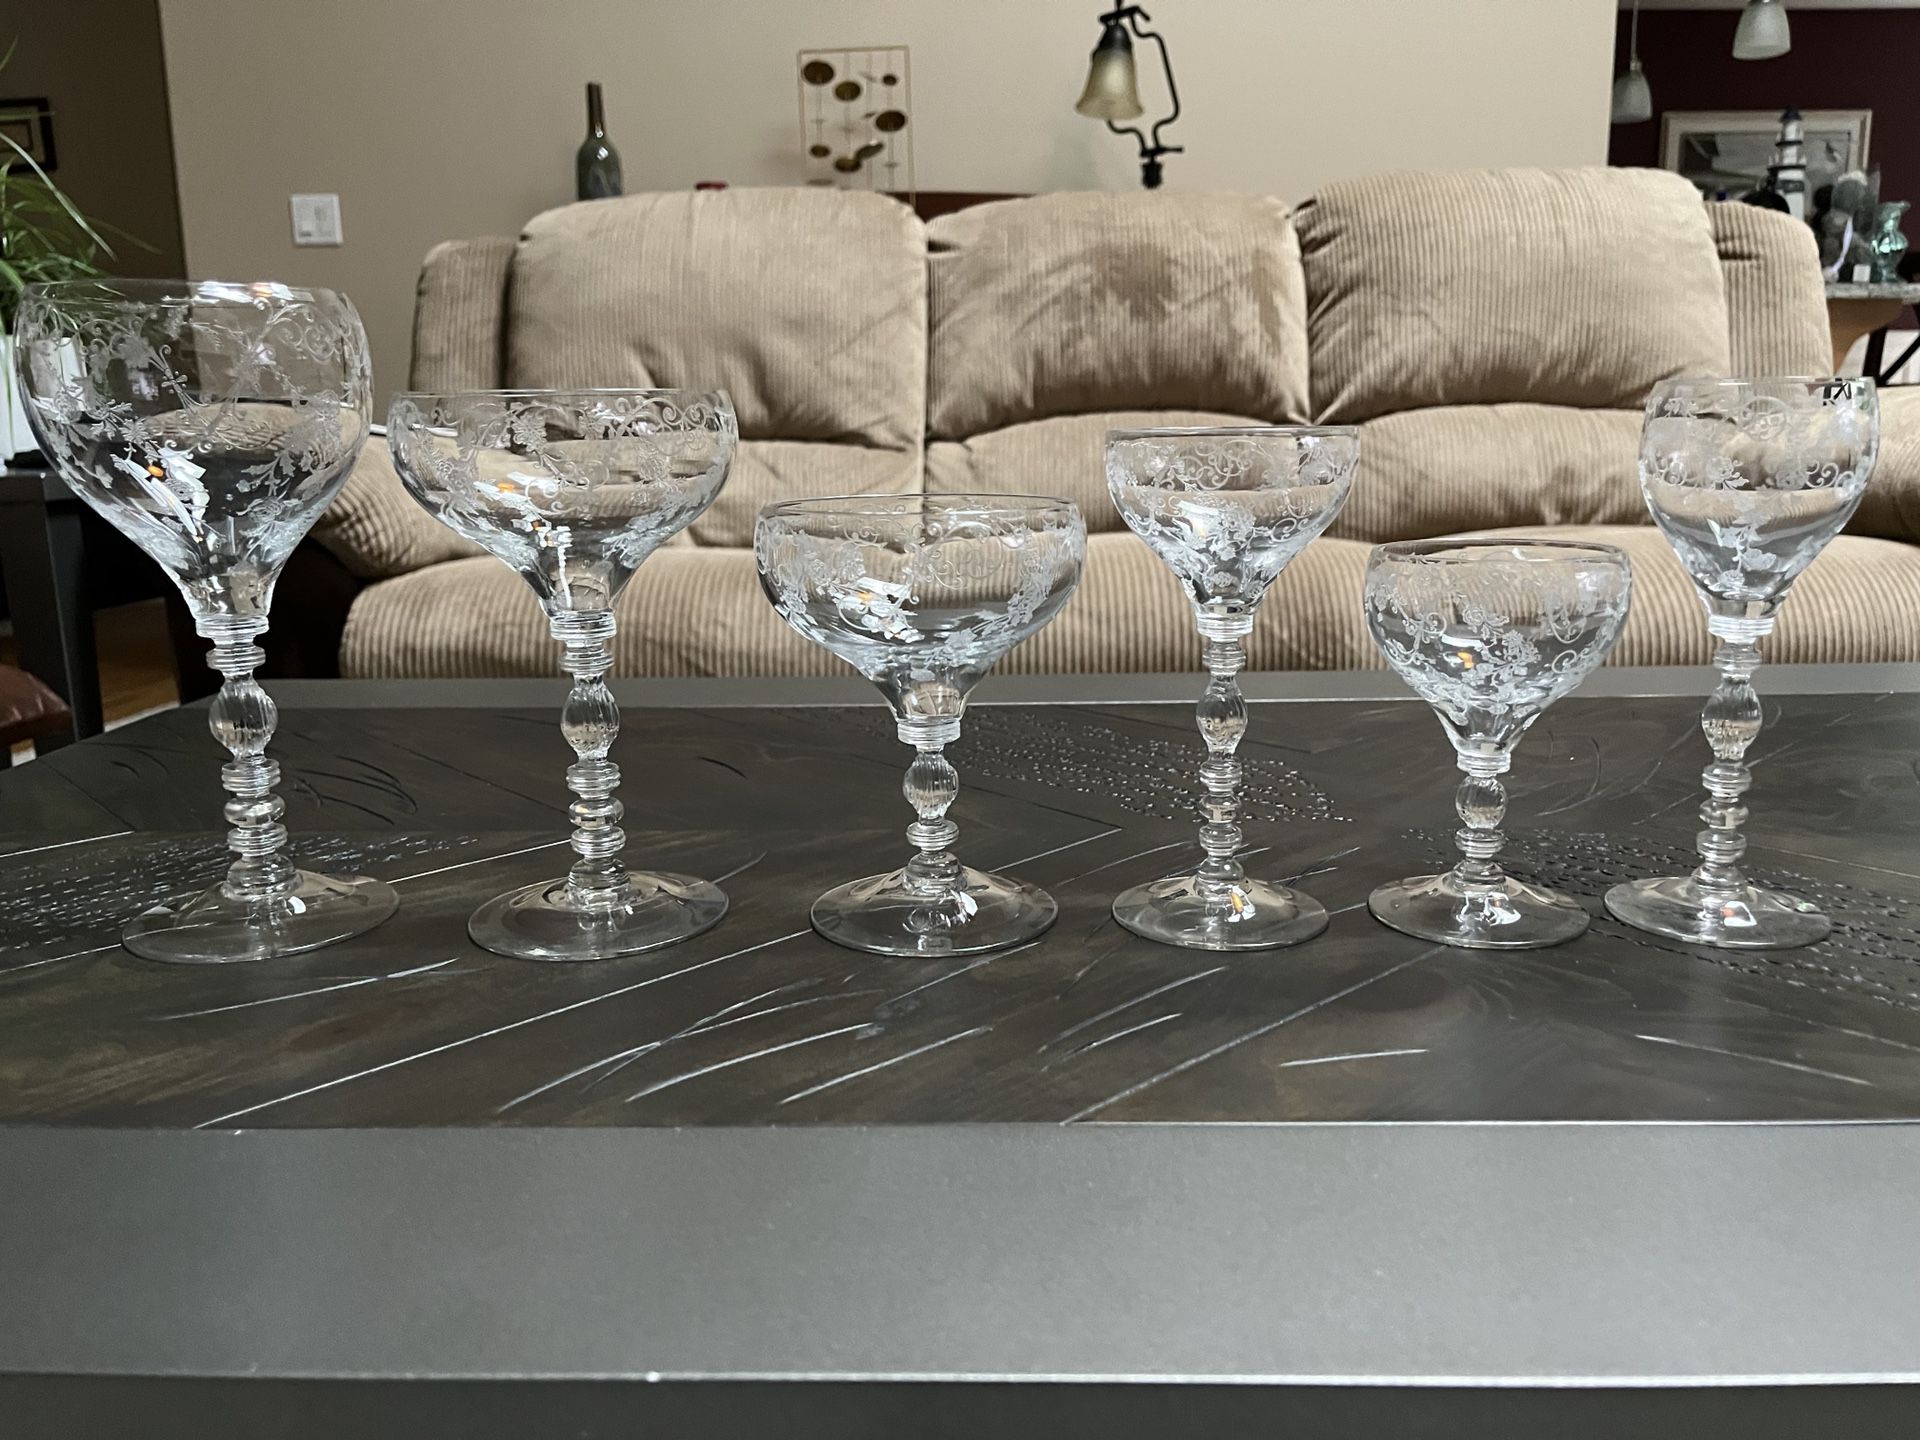 Antique Etched Glasses And Desert Plates